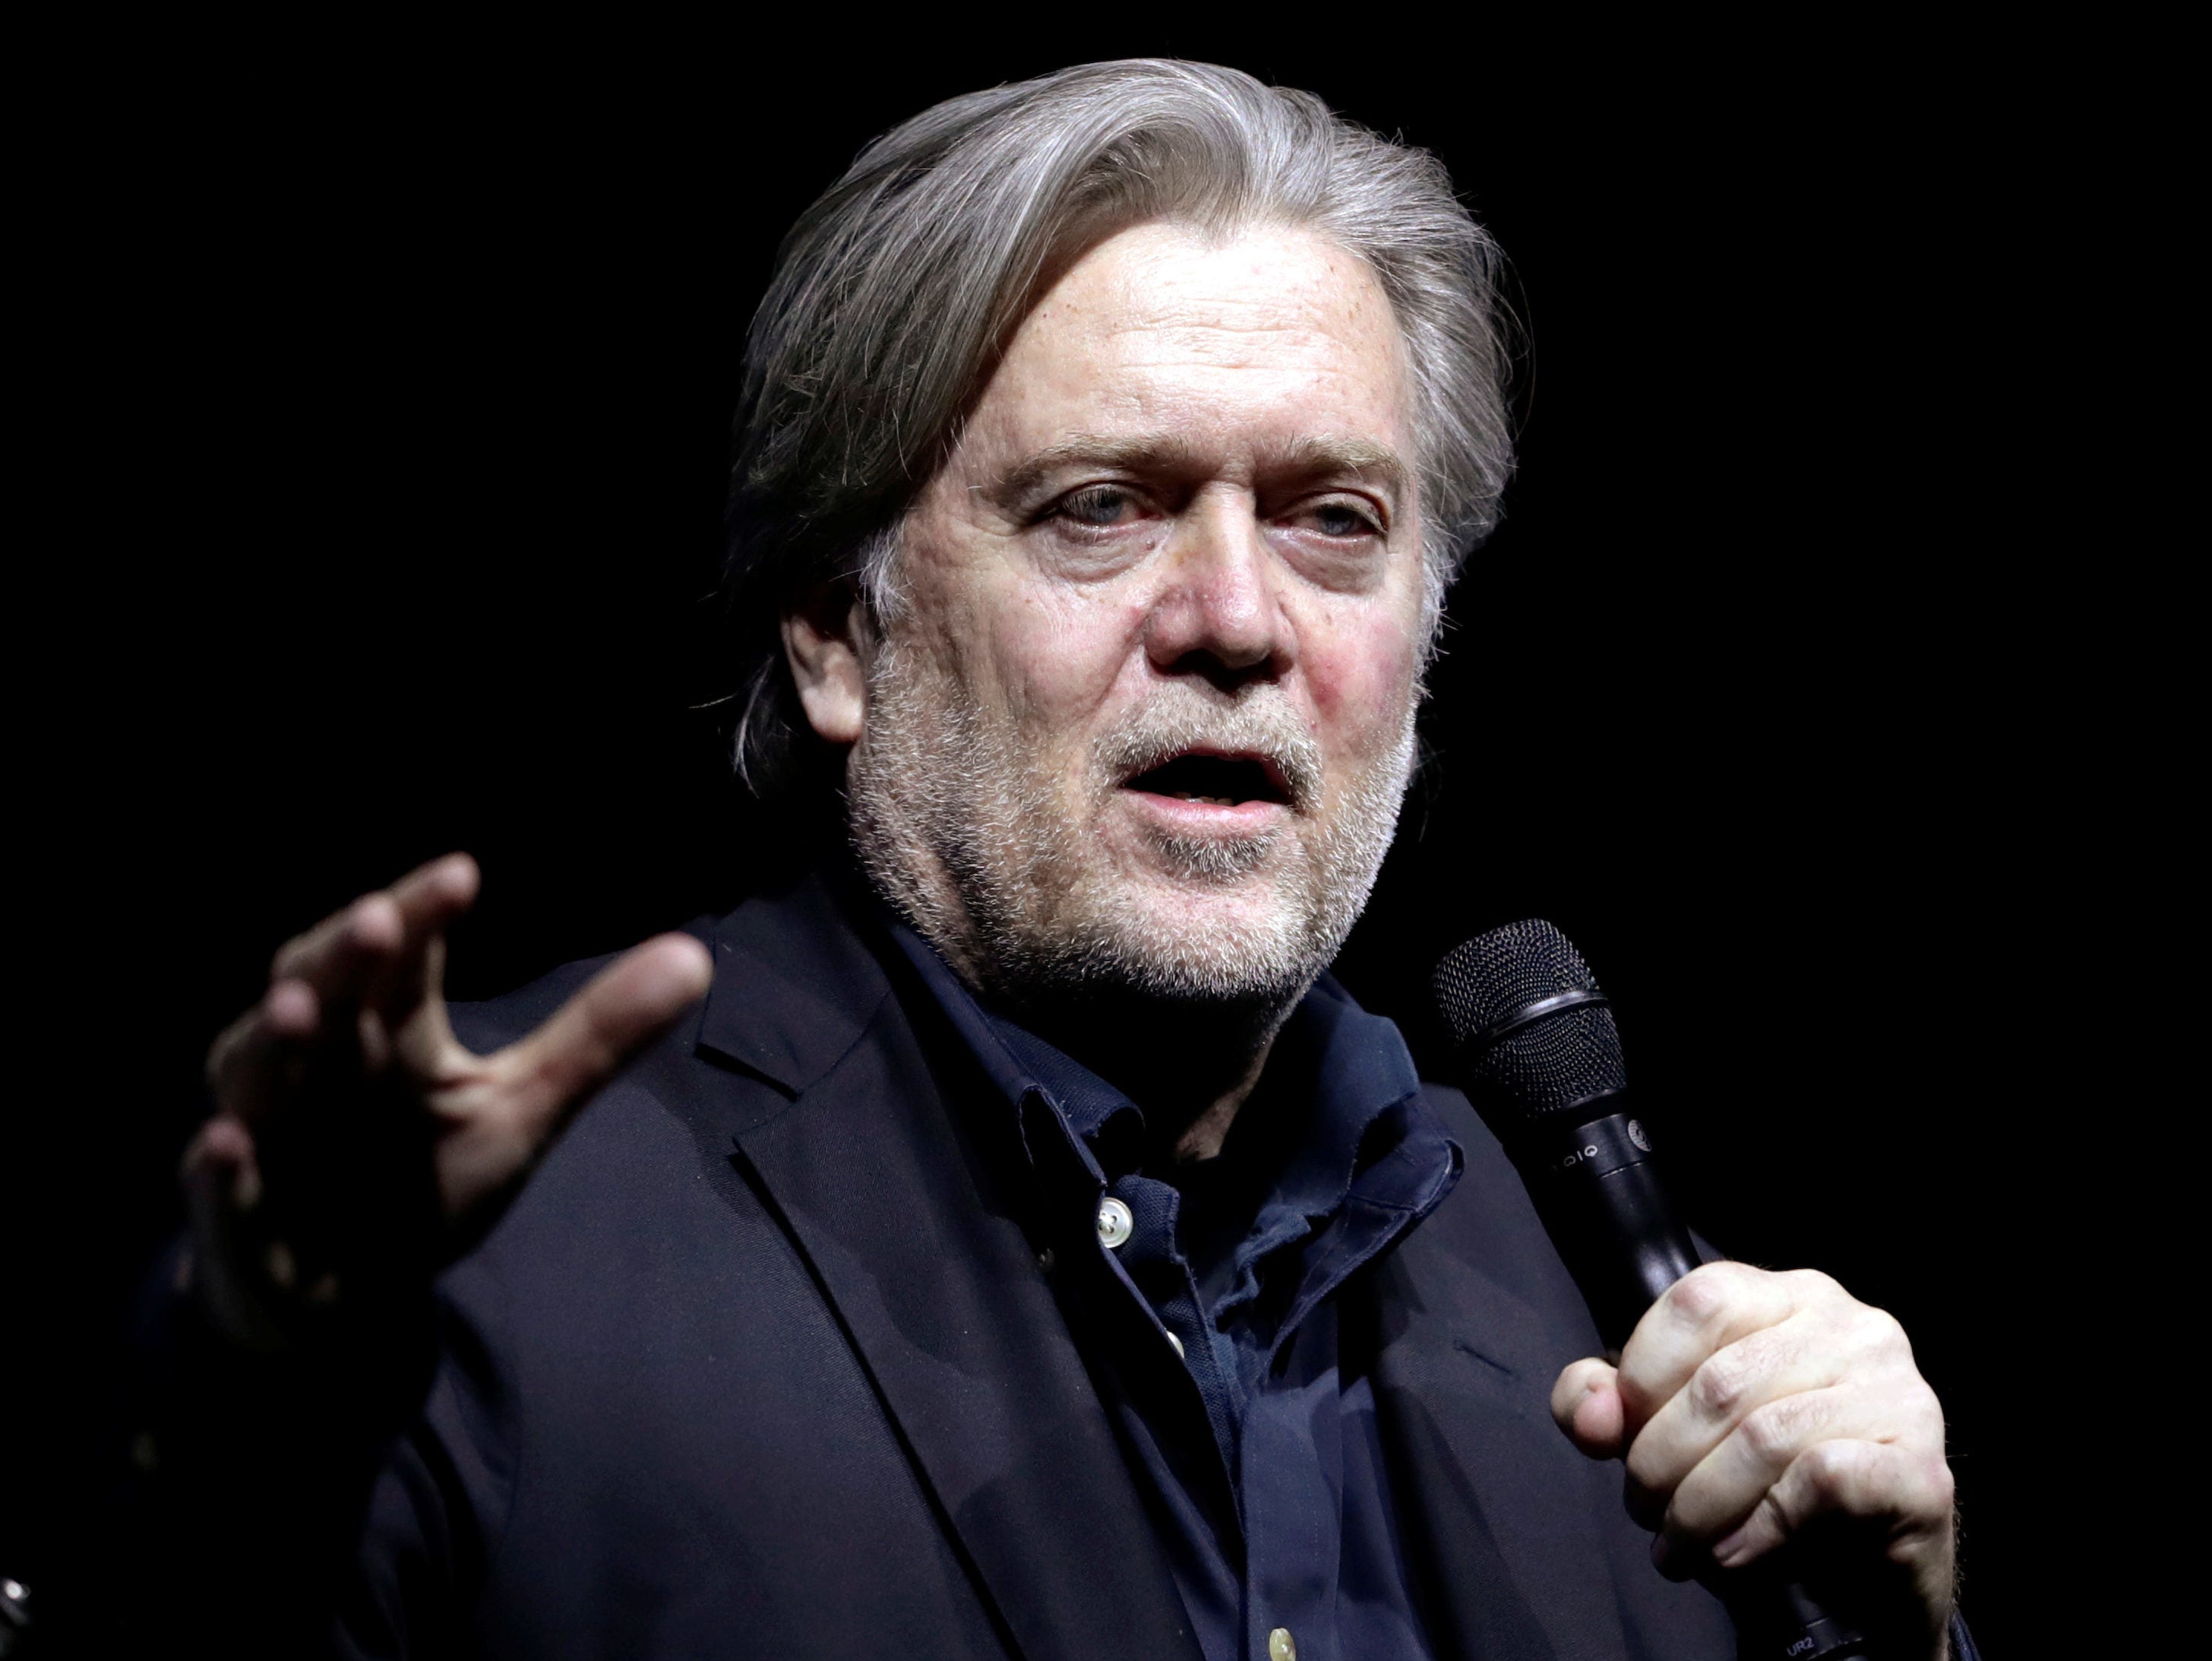 The Economist stands by decision to interview Steve Bannon on stage after New Yorker bows to backlash